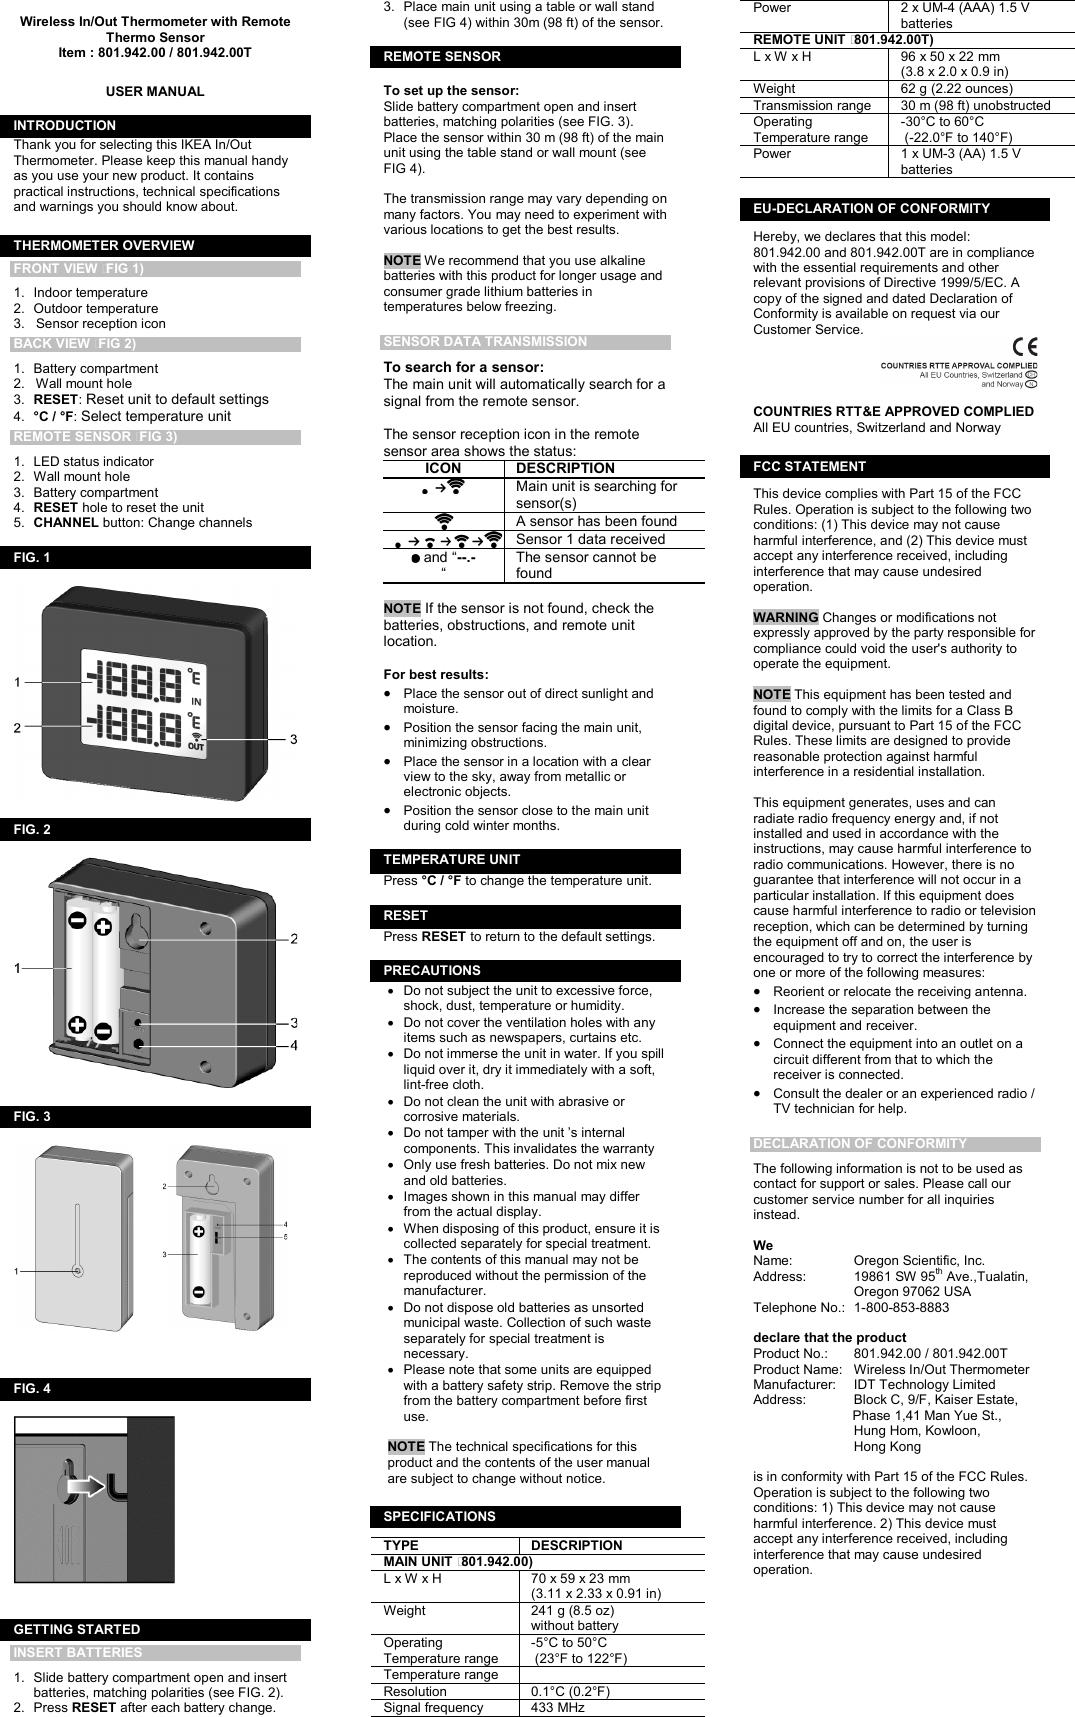   Wireless In/Out Thermometer with Remote Thermo Sensor Item : 801.942.00 / 801.942.00T   USER MANUAL  INTRODUCTION Thank you for selecting this IKEA In/Out Thermometer. Please keep this manual handy as you use your new product. It contains practical instructions, technical specifications and warnings you should know about.  THERMOMETER OVERVIEW FRONT VIEW (FIG 1) 1.  Indoor temperature 2.  Outdoor temperature 3.   Sensor reception icon BACK VIEW (FIG 2) 1.  Battery compartment  2.   Wall mount hole 3.  RESET: Reset unit to default settings  4.  °C / °F: Select temperature unit REMOTE SENSOR (FIG 3) 1.  LED status indicator 2.  Wall mount hole 3.  Battery compartment   4.  RESET hole to reset the unit 5.  CHANNEL button: Change channels  FIG. 1     FIG. 2    FIG. 3         FIG. 4     GETTING STARTED INSERT BATTERIES 1.  Slide battery compartment open and insert batteries, matching polarities (see FIG. 2). 2.  Press RESET after each battery change. 3.  Place main unit using a table or wall stand (see FIG 4) within 30m (98 ft) of the sensor.  REMOTE SENSOR (  To set up the sensor: Slide battery compartment open and insert batteries, matching polarities (see FIG. 3). Place the sensor within 30 m (98 ft) of the main unit using the table stand or wall mount (see FIG 4).   The transmission range may vary depending on many factors. You may need to experiment with various locations to get the best results.  NOTE We recommend that you use alkaline batteries with this product for longer usage and consumer grade lithium batteries in temperatures below freezing.  SENSOR DATA TRANSMISSION To search for a sensor:  The main unit will automatically search for a signal from the remote sensor.  The sensor reception icon in the remote sensor area shows the status: ICON  DESCRIPTION  Main unit is searching for sensor(s)  A sensor has been found  Sensor 1 data received  and “--.- “ The sensor cannot be found   NOTE If the sensor is not found, check the batteries, obstructions, and remote unit location.  For best results: •  Place the sensor out of direct sunlight and moisture.  •  Position the sensor facing the main unit, minimizing obstructions. •  Place the sensor in a location with a clear view to the sky, away from metallic or electronic objects. •  Position the sensor close to the main unit during cold winter months.  TEMPERATURE UNIT Press °C / °F to change the temperature unit.  RESET Press RESET to return to the default settings.  PRECAUTIONS •  Do not subject the unit to excessive force, shock, dust, temperature or humidity. •  Do not cover the ventilation holes with any items such as newspapers, curtains etc. •  Do not immerse the unit in water. If you spill liquid over it, dry it immediately with a soft, lint-free cloth. •  Do not clean the unit with abrasive or corrosive materials.  •  Do not tamper with the unit ’s internal components. This invalidates the warranty •  Only use fresh batteries. Do not mix new and old batteries. •  Images shown in this manual may differ from the actual display. •  When disposing of this product, ensure it is collected separately for special treatment. •  The contents of this manual may not be reproduced without the permission of the manufacturer. •  Do not dispose old batteries as unsorted municipal waste. Collection of such waste separately for special treatment is necessary. •  Please note that some units are equipped with a battery safety strip. Remove the strip from the battery compartment before first use.  NOTE The technical specifications for this product and the contents of the user manual are subject to change without notice.  SPECIFICATIONS TYPE  DESCRIPTION MAIN UNIT (801.942.00) L x W x H  70 x 59 x 23 mm  (3.11 x 2.33 x 0.91 in) Weight  241 g (8.5 oz)  without battery Operating Temperature range -5°C to 50°C  (23°F to 122°F) Temperature range   Resolution  0.1°C (0.2°F) Signal frequency   433 MHz Power  2 x UM-4 (AAA) 1.5 V batteries REMOTE UNIT (801.942.00T) L x W x H  96 x 50 x 22 mm  (3.8 x 2.0 x 0.9 in) Weight  62 g (2.22 ounces) Transmission range  30 m (98 ft) unobstructed Operating Temperature range -30°C to 60°C  (-22.0°F to 140°F) Power  1 x UM-3 (AA) 1.5 V batteries  EU-DECLARATION OF CONFORMITY Hereby, we declares that this model: 801.942.00 and 801.942.00T are in compliance with the essential requirements and other relevant provisions of Directive 1999/5/EC. A copy of the signed and dated Declaration of Conformity is available on request via our Customer Service.   COUNTRIES RTT&amp;E APPROVED COMPLIED  All EU countries, Switzerland and Norway  FCC STATEMENT This device complies with Part 15 of the FCC Rules. Operation is subject to the following two conditions: (1) This device may not cause harmful interference, and (2) This device must accept any interference received, including interference that may cause undesired operation.  WARNING Changes or modifications not expressly approved by the party responsible for compliance could void the user&apos;s authority to operate the equipment.  NOTE This equipment has been tested and found to comply with the limits for a Class B digital device, pursuant to Part 15 of the FCC Rules. These limits are designed to provide reasonable protection against harmful interference in a residential installation.  This equipment generates, uses and can radiate radio frequency energy and, if not installed and used in accordance with the instructions, may cause harmful interference to radio communications. However, there is no guarantee that interference will not occur in a particular installation. If this equipment does cause harmful interference to radio or television reception, which can be determined by turning the equipment off and on, the user is encouraged to try to correct the interference by one or more of the following measures: •  Reorient or relocate the receiving antenna. •  Increase the separation between the equipment and receiver. •  Connect the equipment into an outlet on a circuit different from that to which the receiver is connected. •  Consult the dealer or an experienced radio / TV technician for help.  DECLARATION OF CONFORMITY The following information is not to be used as contact for support or sales. Please call our customer service number for all inquiries instead.  We Name:  Oregon Scientific, Inc. Address:  19861 SW 95th Ave.,Tualatin,   Oregon 97062 USA Telephone No.:  1-800-853-8883  declare that the product  Product No.:  801.942.00 / 801.942.00T Product Name:  Wireless In/Out Thermometer Manufacturer:  IDT Technology Limited Address:  Block C, 9/F, Kaiser Estate,        Phase 1,41 Man Yue St.,    Hung Hom, Kowloon,      Hong Kong  is in conformity with Part 15 of the FCC Rules.  Operation is subject to the following two conditions: 1) This device may not cause harmful interference. 2) This device must accept any interference received, including interference that may cause undesired operation.  